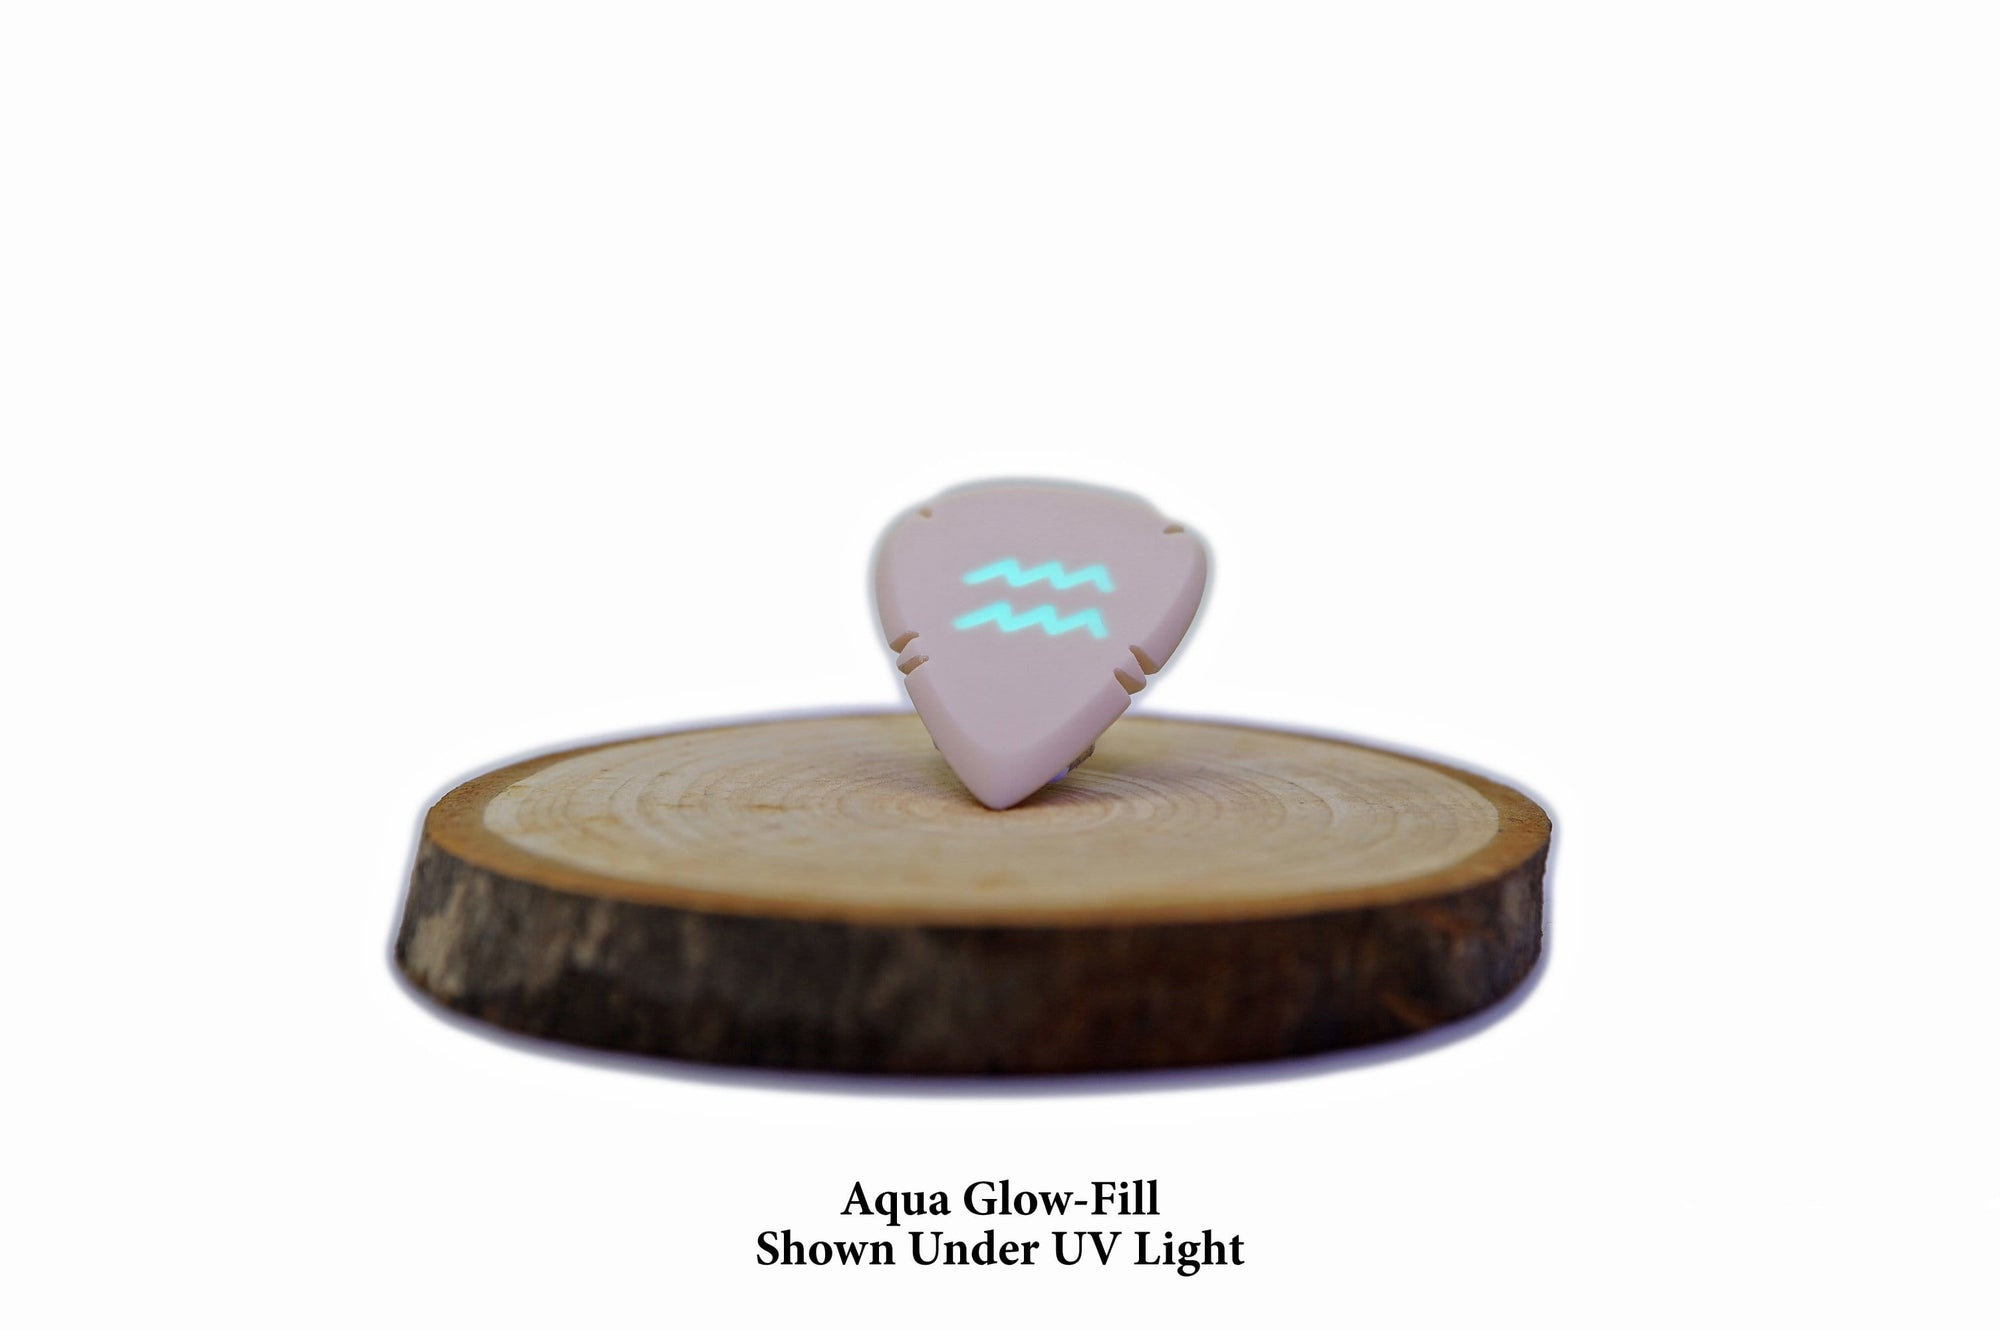 Personalized Guitar Pick Engraving (Pick NOT Included)-ragnarok-norse-guitar pick-plectrum-Iron Age Guitar Accessories